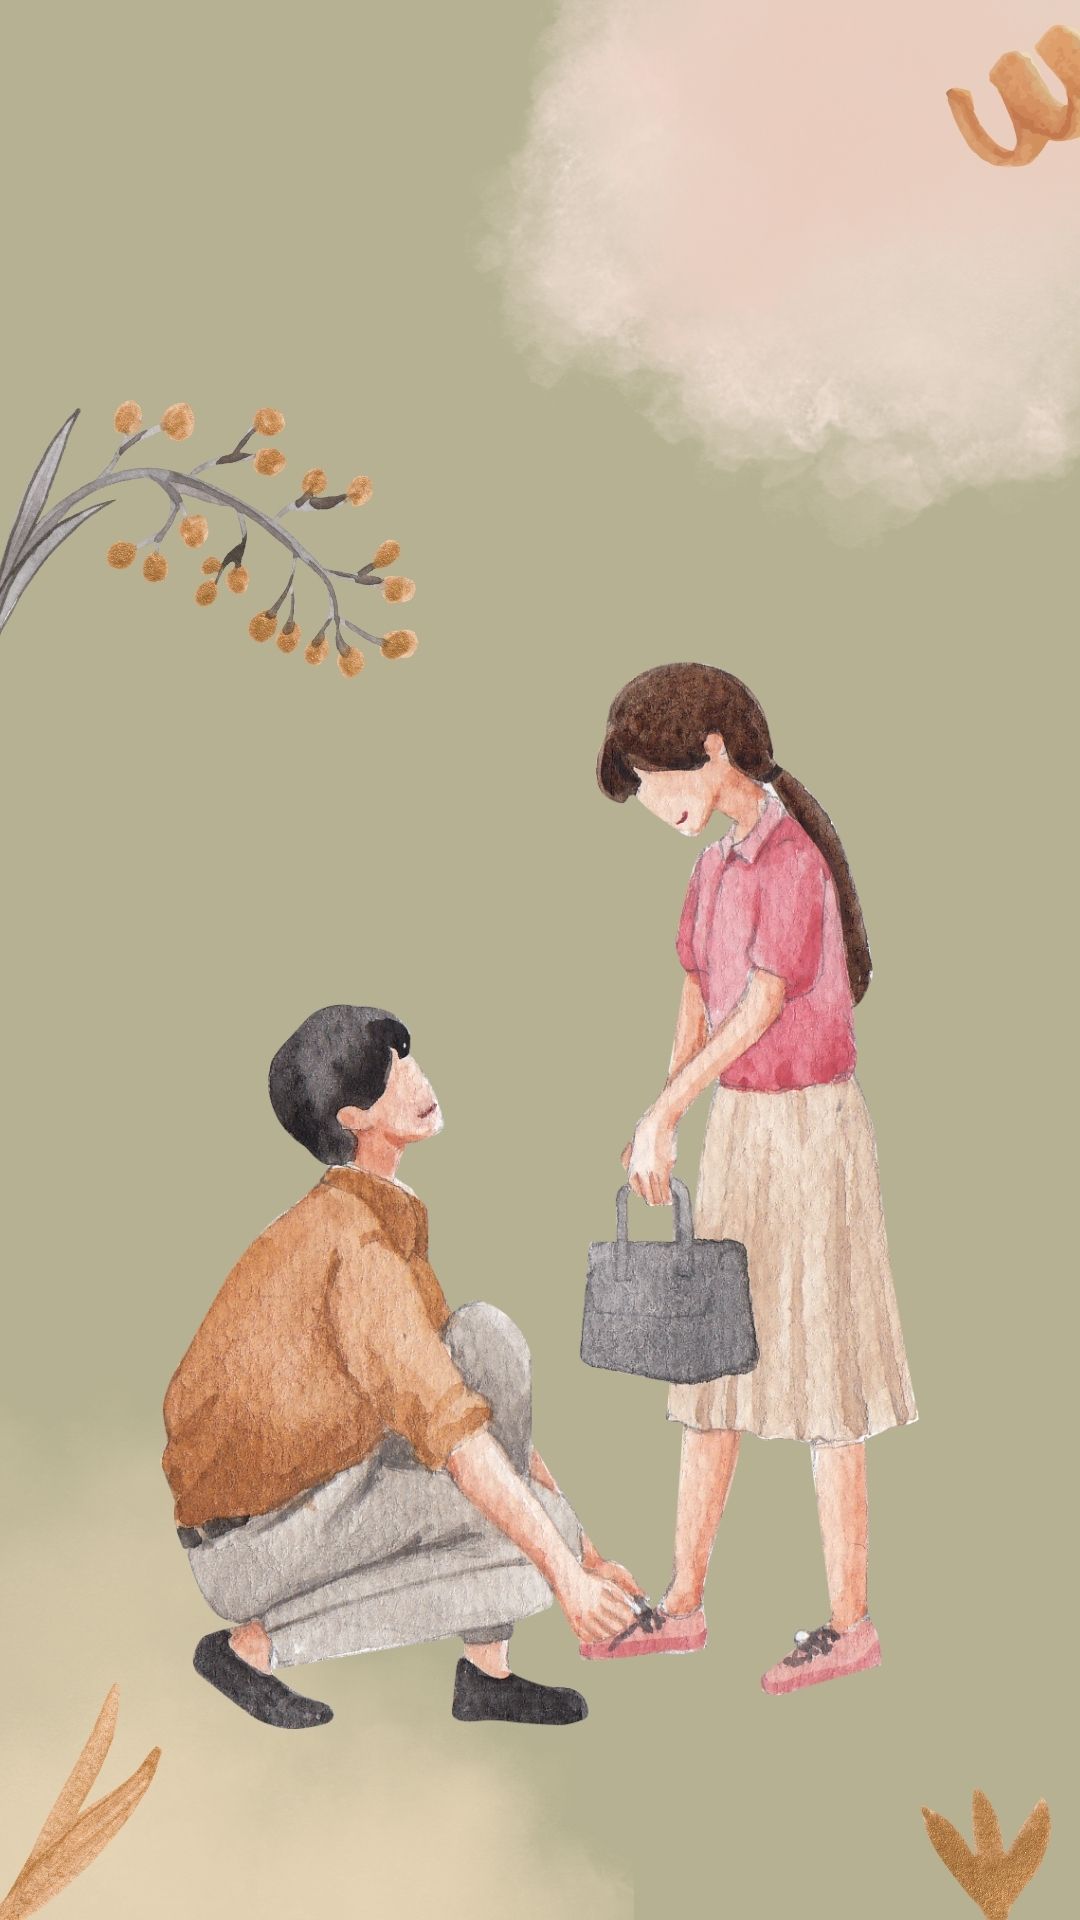 A man is helping the woman tie her shoes - Soft green